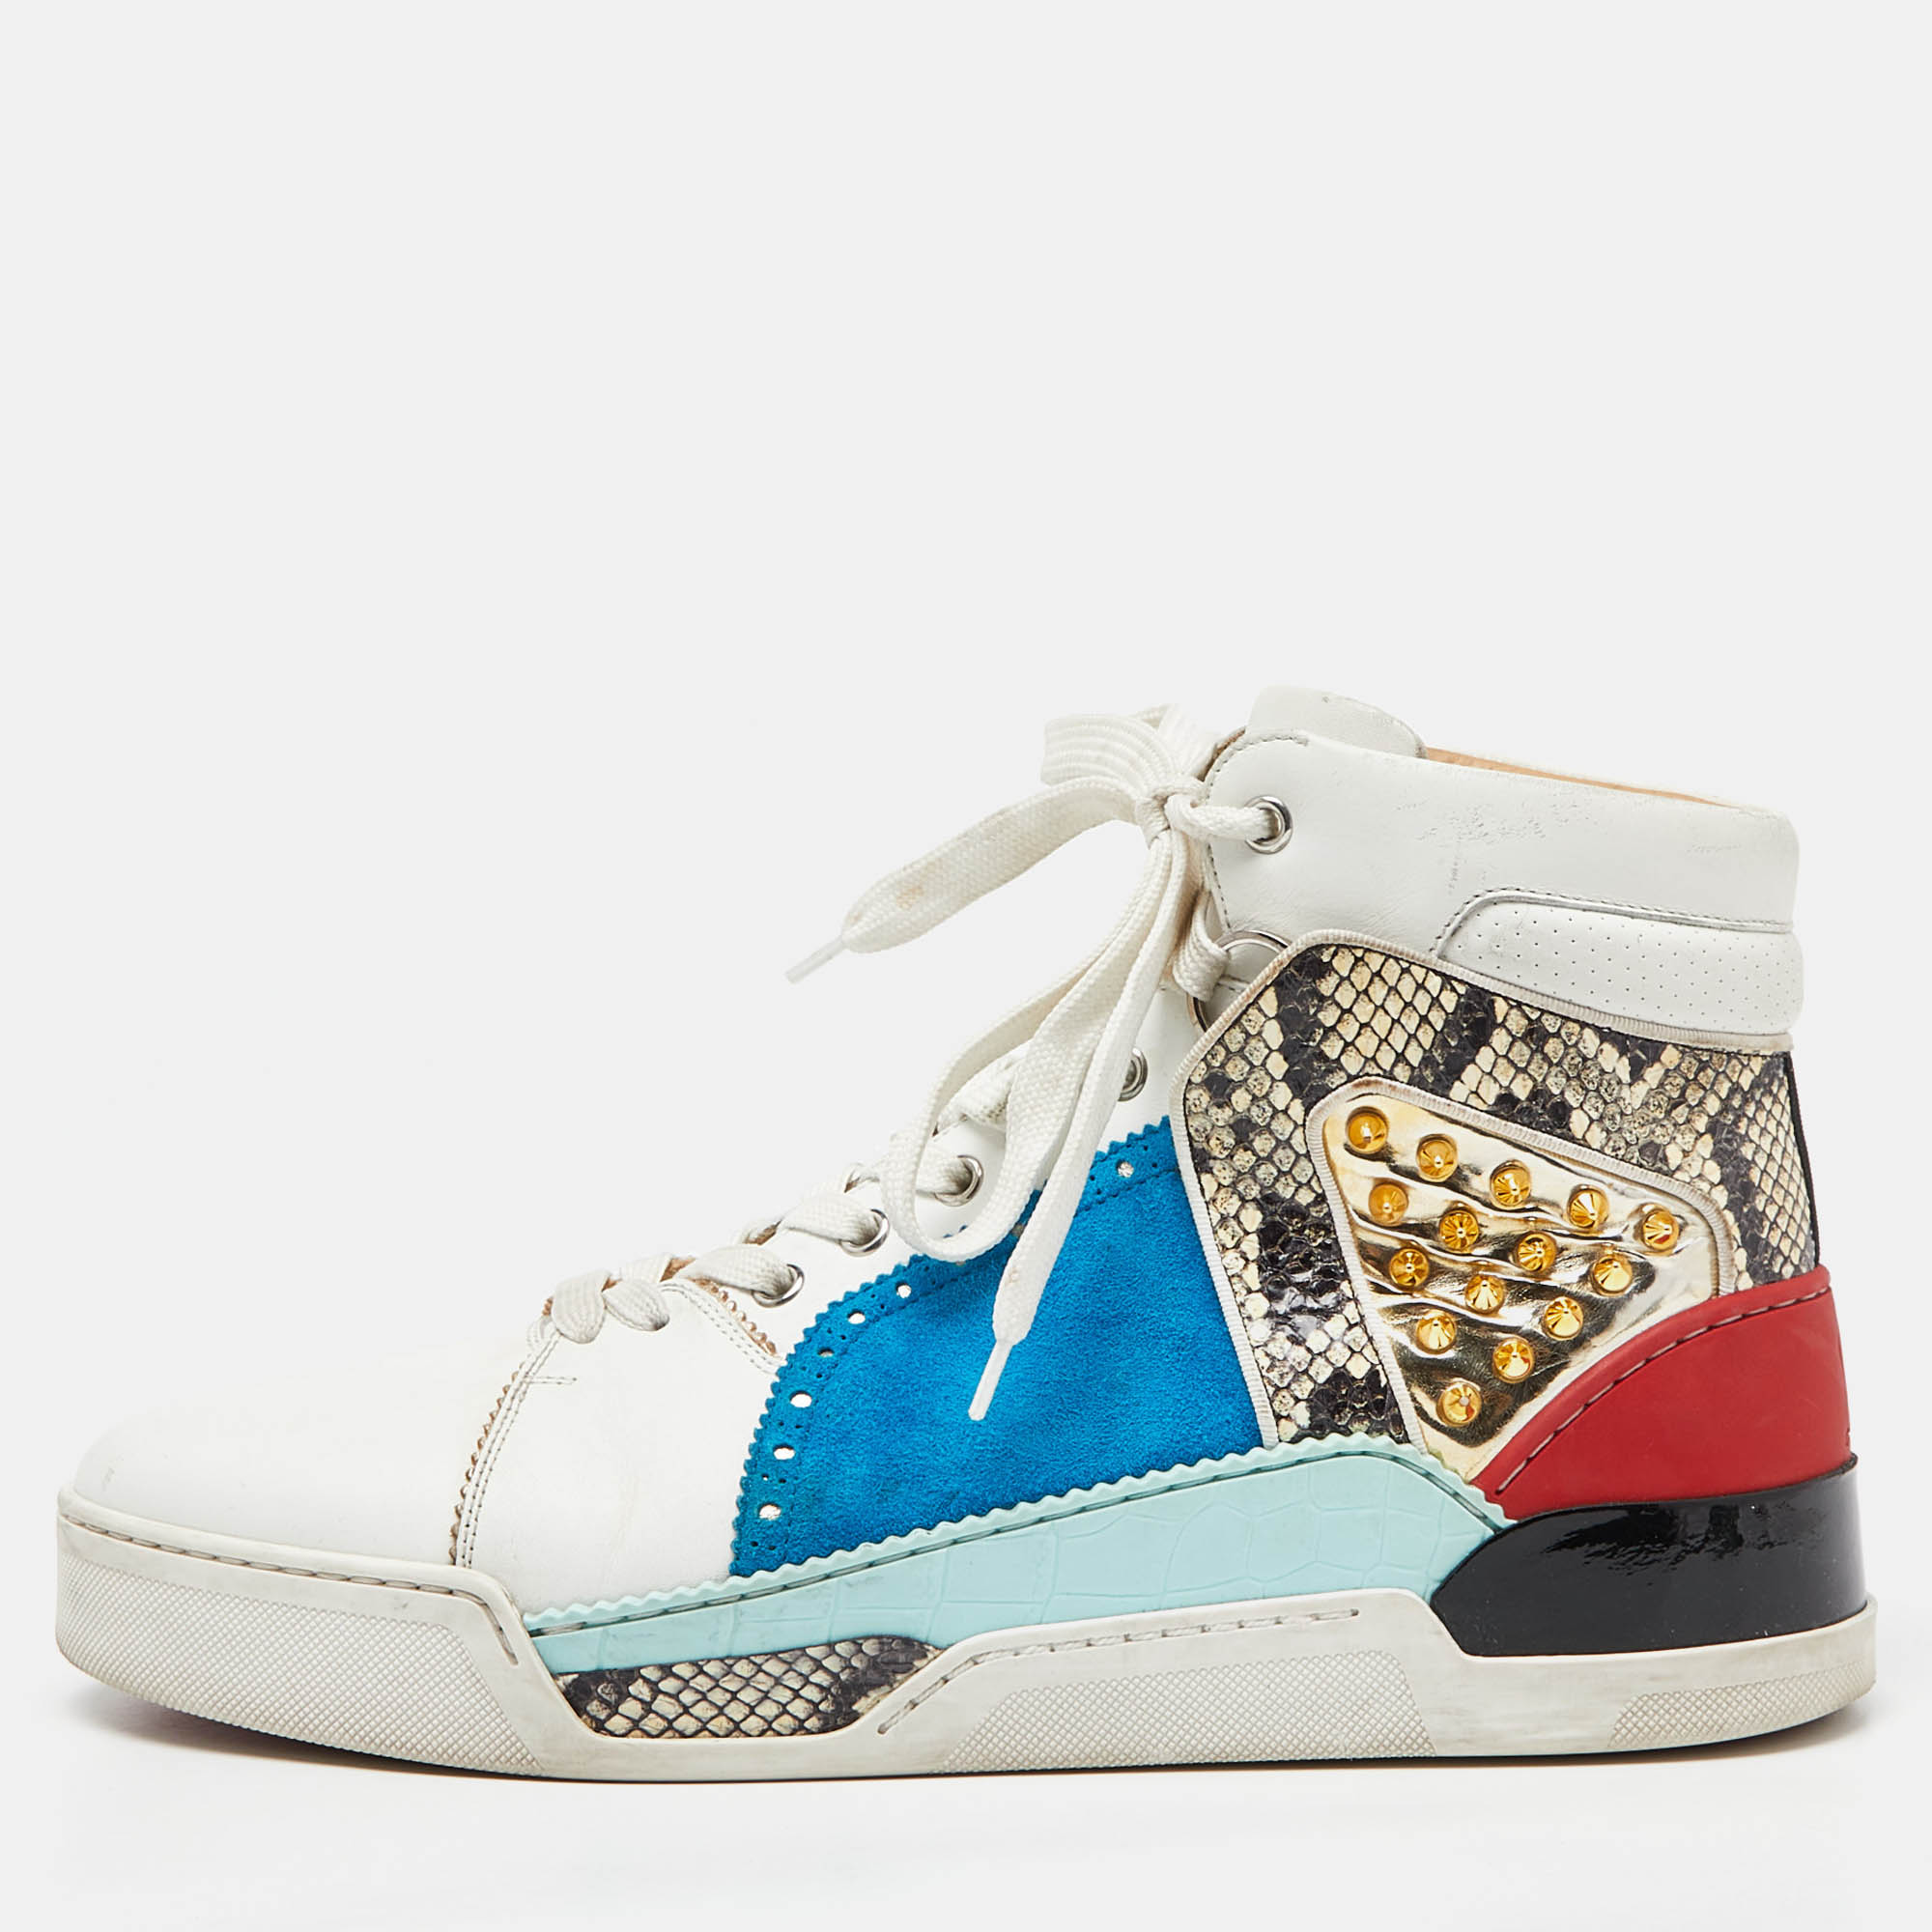 Christian louboutin multicolor suede and python leather loubikick high top sneakers size 44.5